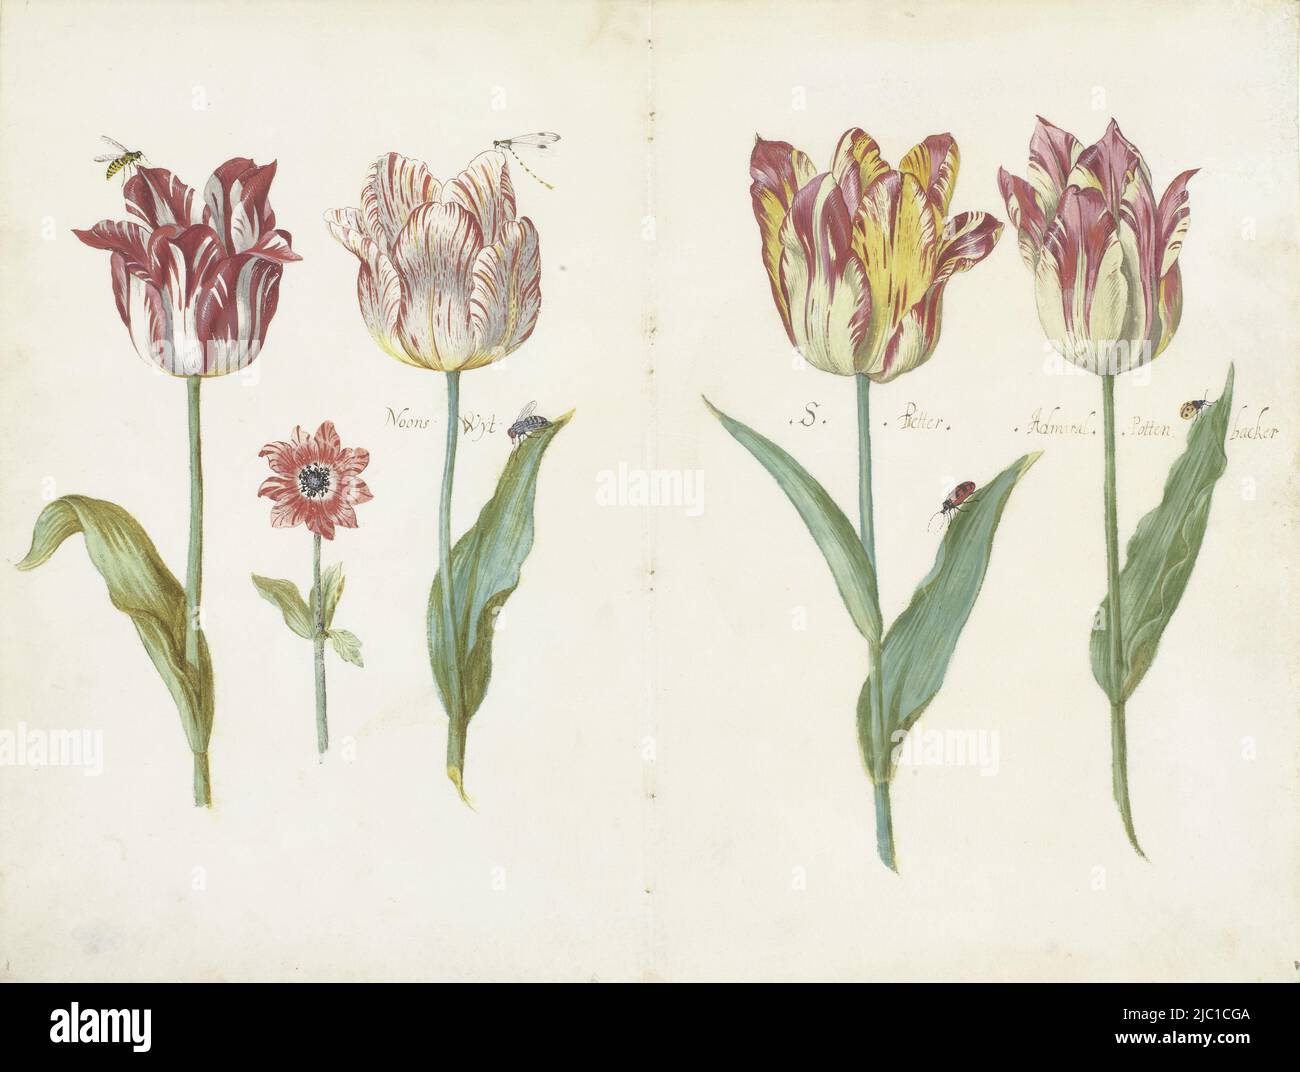 Four tulips, three with the names: Noons Wÿt, S. Pietter and Admiral Pottenbacker, Sheet from a Tulip Book Four tulips with insects and a smaller flower Ensemble of double folded and on both sides with tulips meaning sheets (series title)., draughtsman: Jacob Marrel, c. 1640, parchment (animal material), h 340 mm × w 449 mm Stock Photo